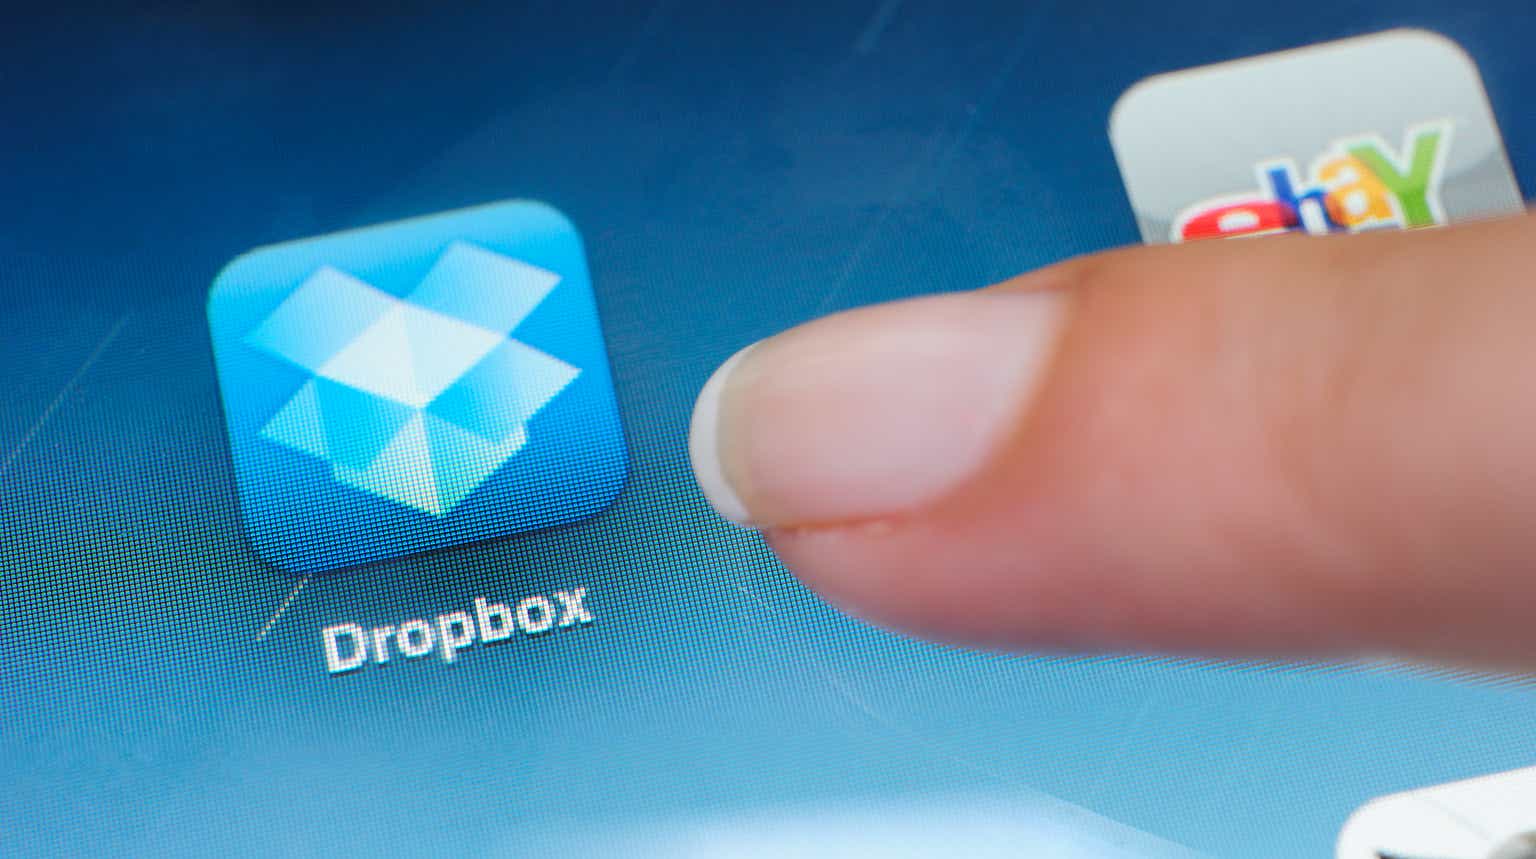 Dropbox: The Competition Is Fierce And Differentiation Is Nil